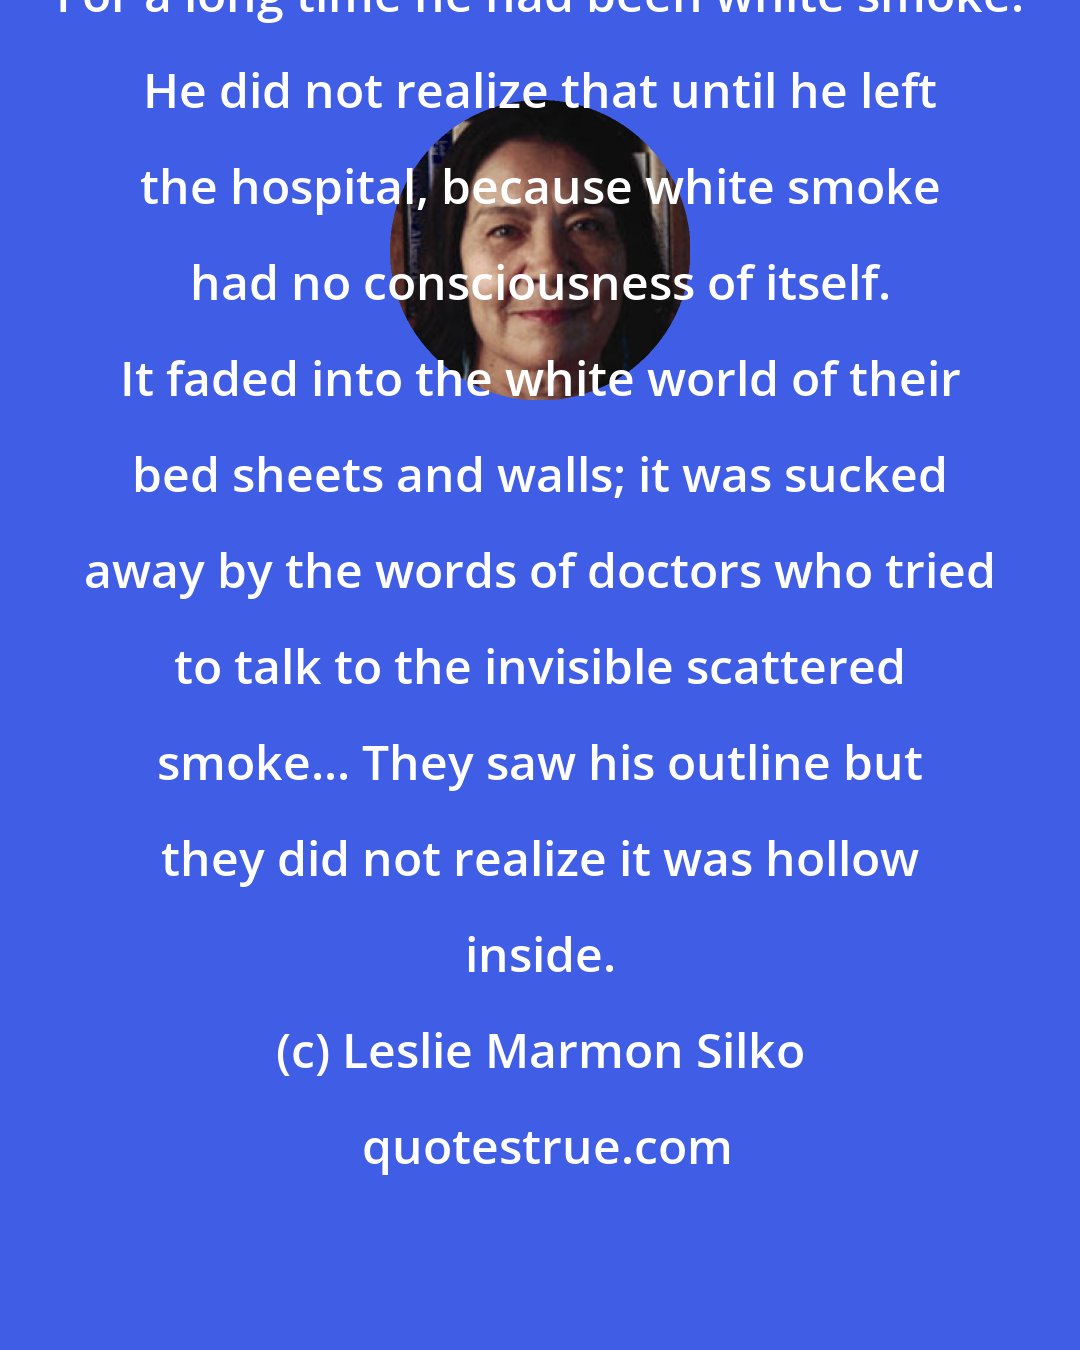 Leslie Marmon Silko: For a long time he had been white smoke. He did not realize that until he left the hospital, because white smoke had no consciousness of itself. It faded into the white world of their bed sheets and walls; it was sucked away by the words of doctors who tried to talk to the invisible scattered smoke... They saw his outline but they did not realize it was hollow inside.